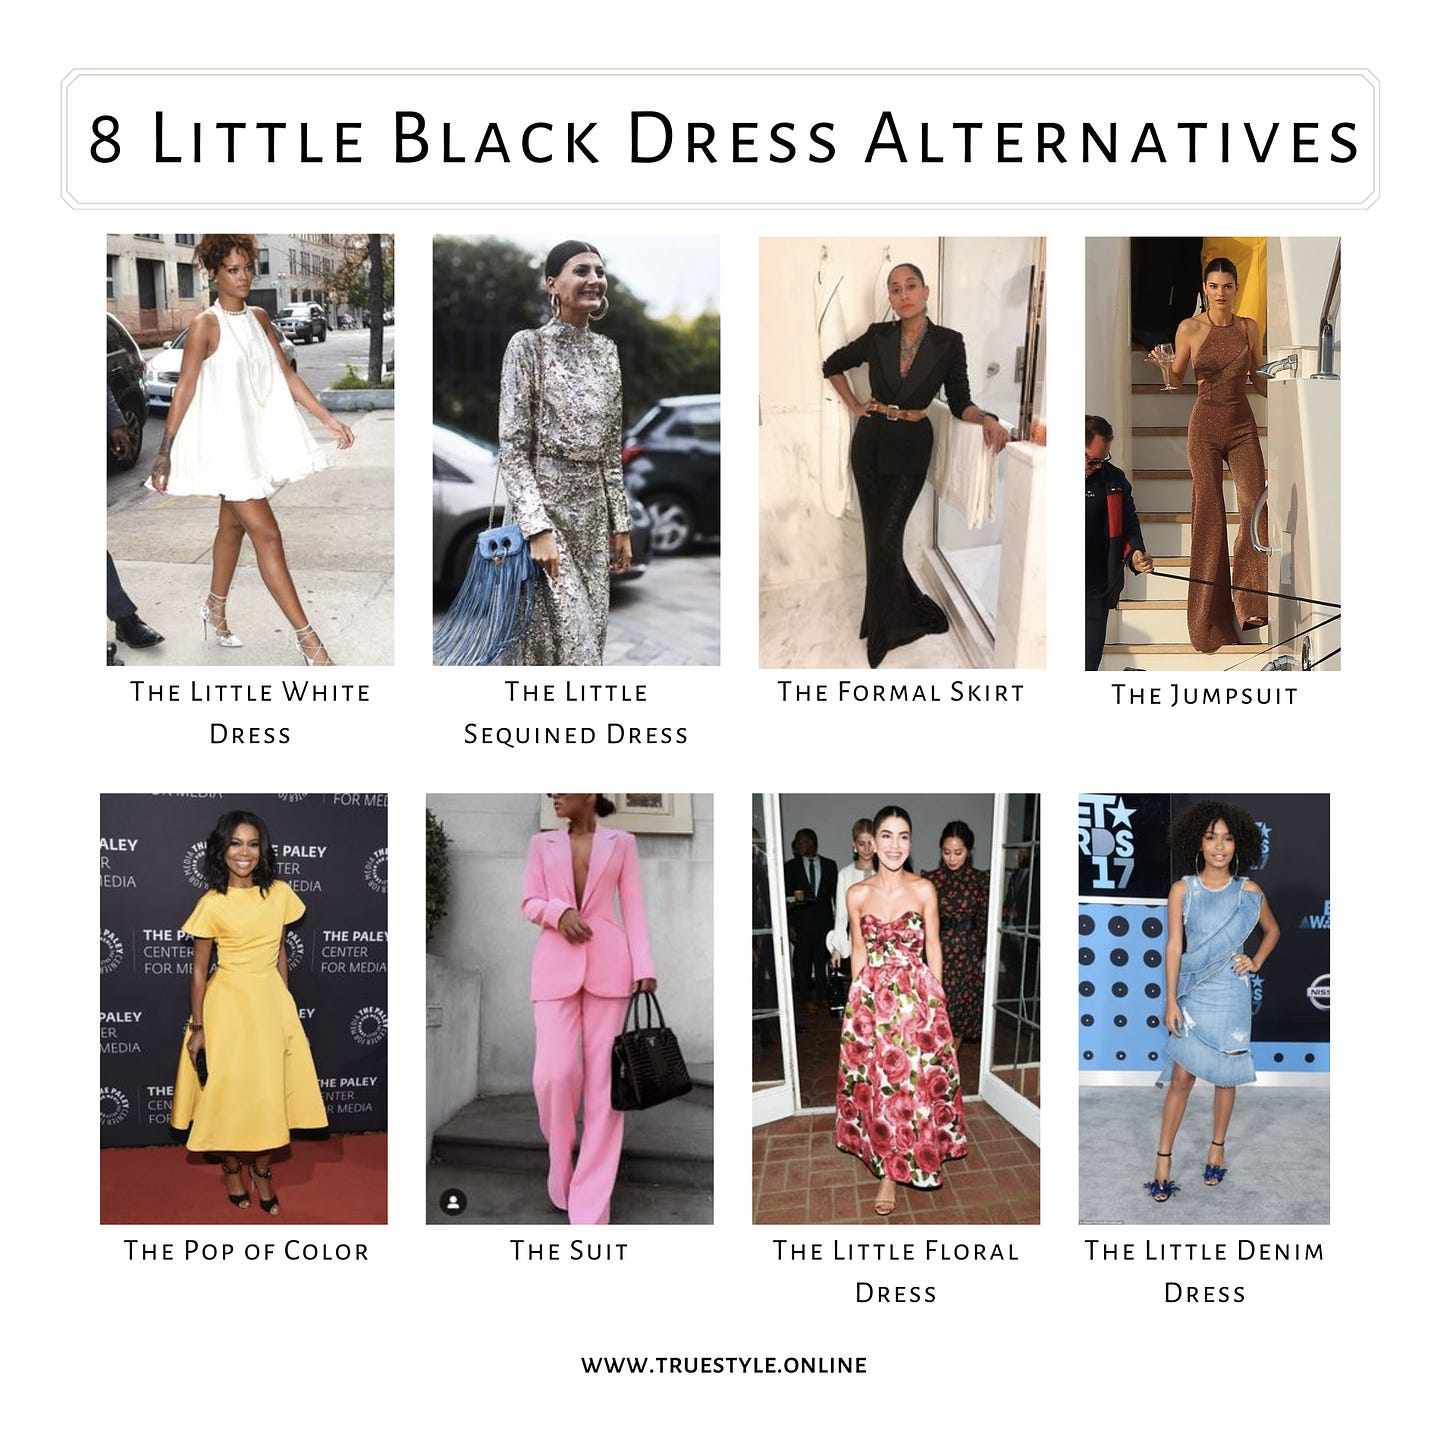 Photo collage of eight Little Black Dress alternatives. Little white dress, little sequined dress, the formal skirt, the jumpsuit, the pop of color, the suit, the little floral dress and the little denim dress.